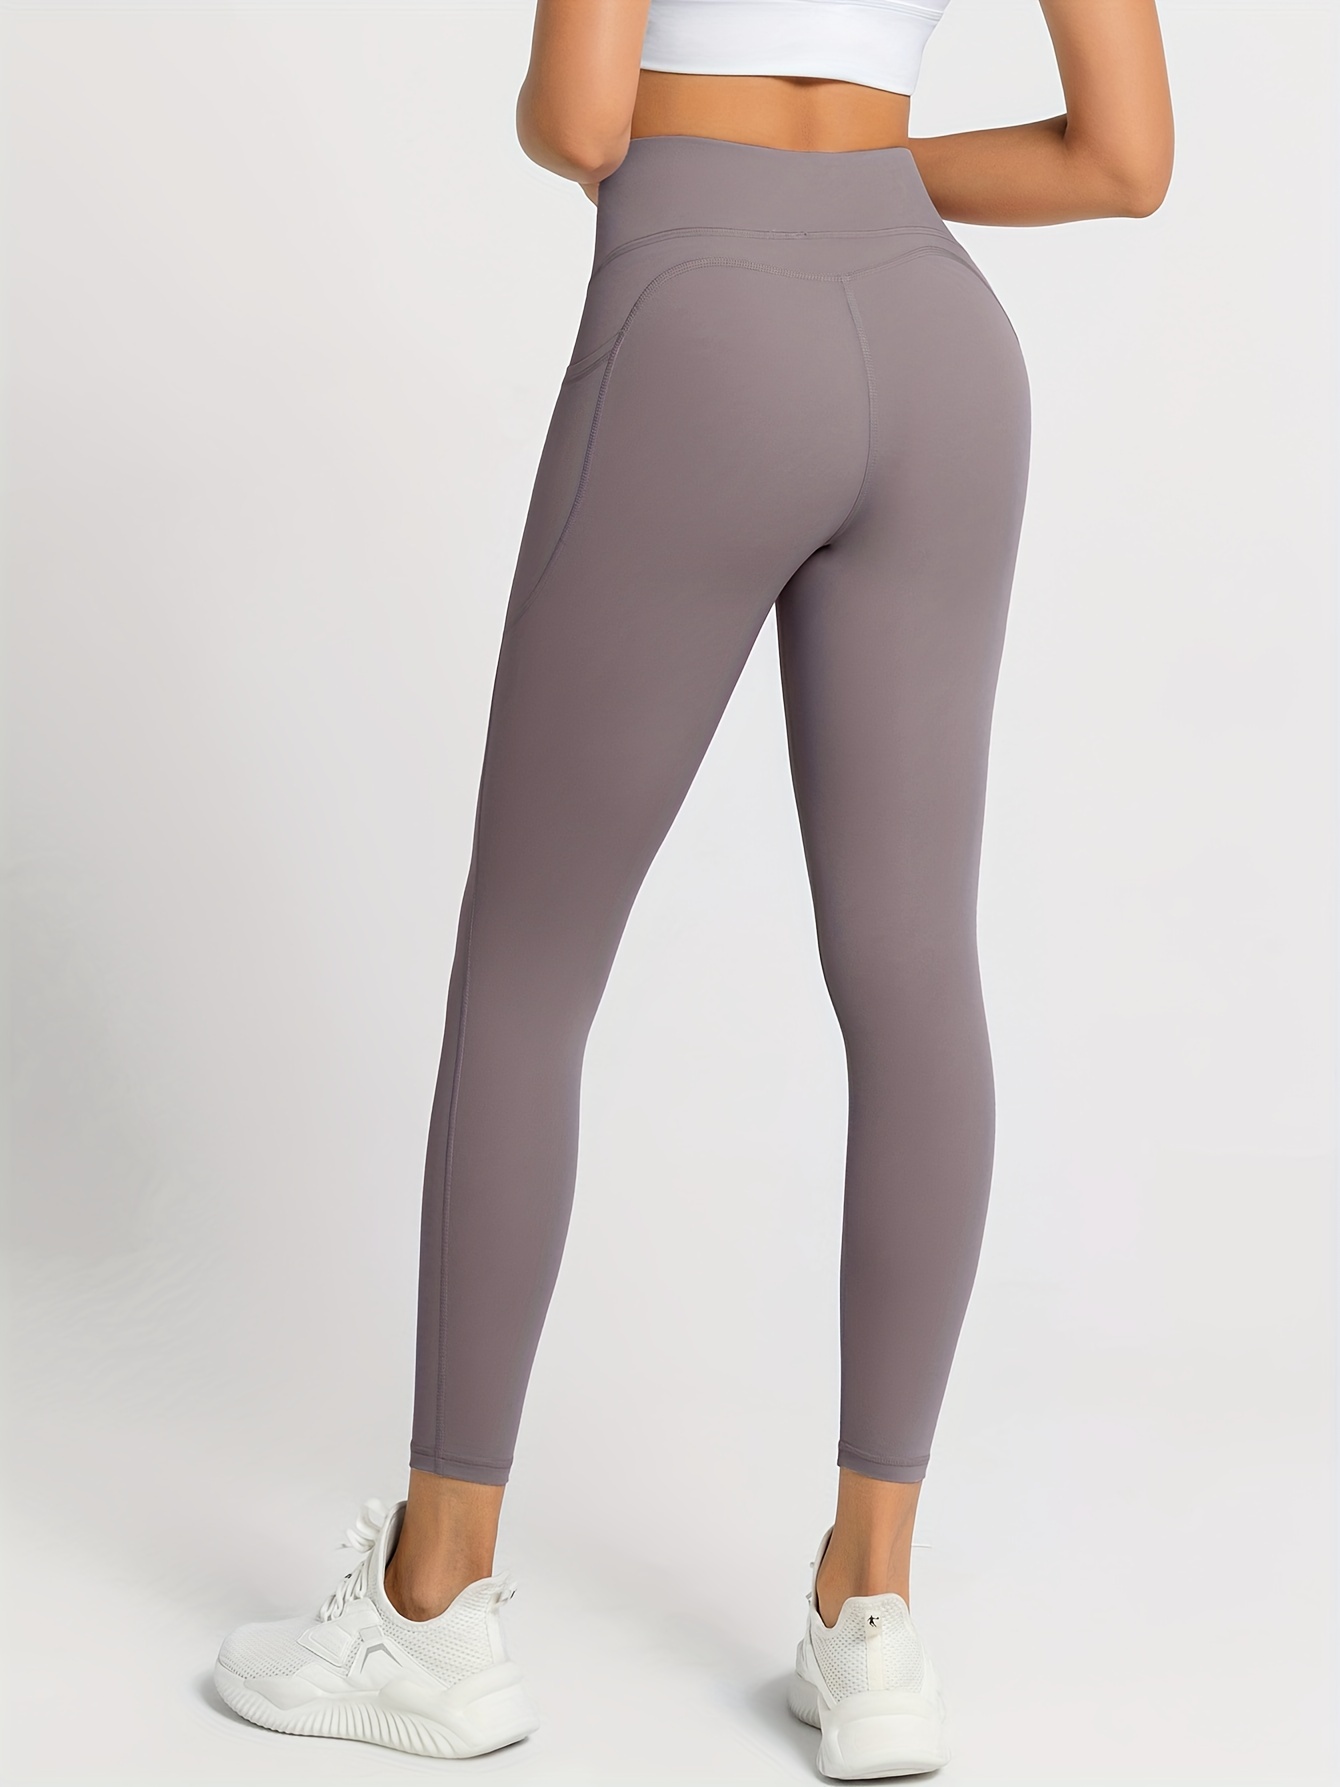 Shades of Grey Leggings with pockets